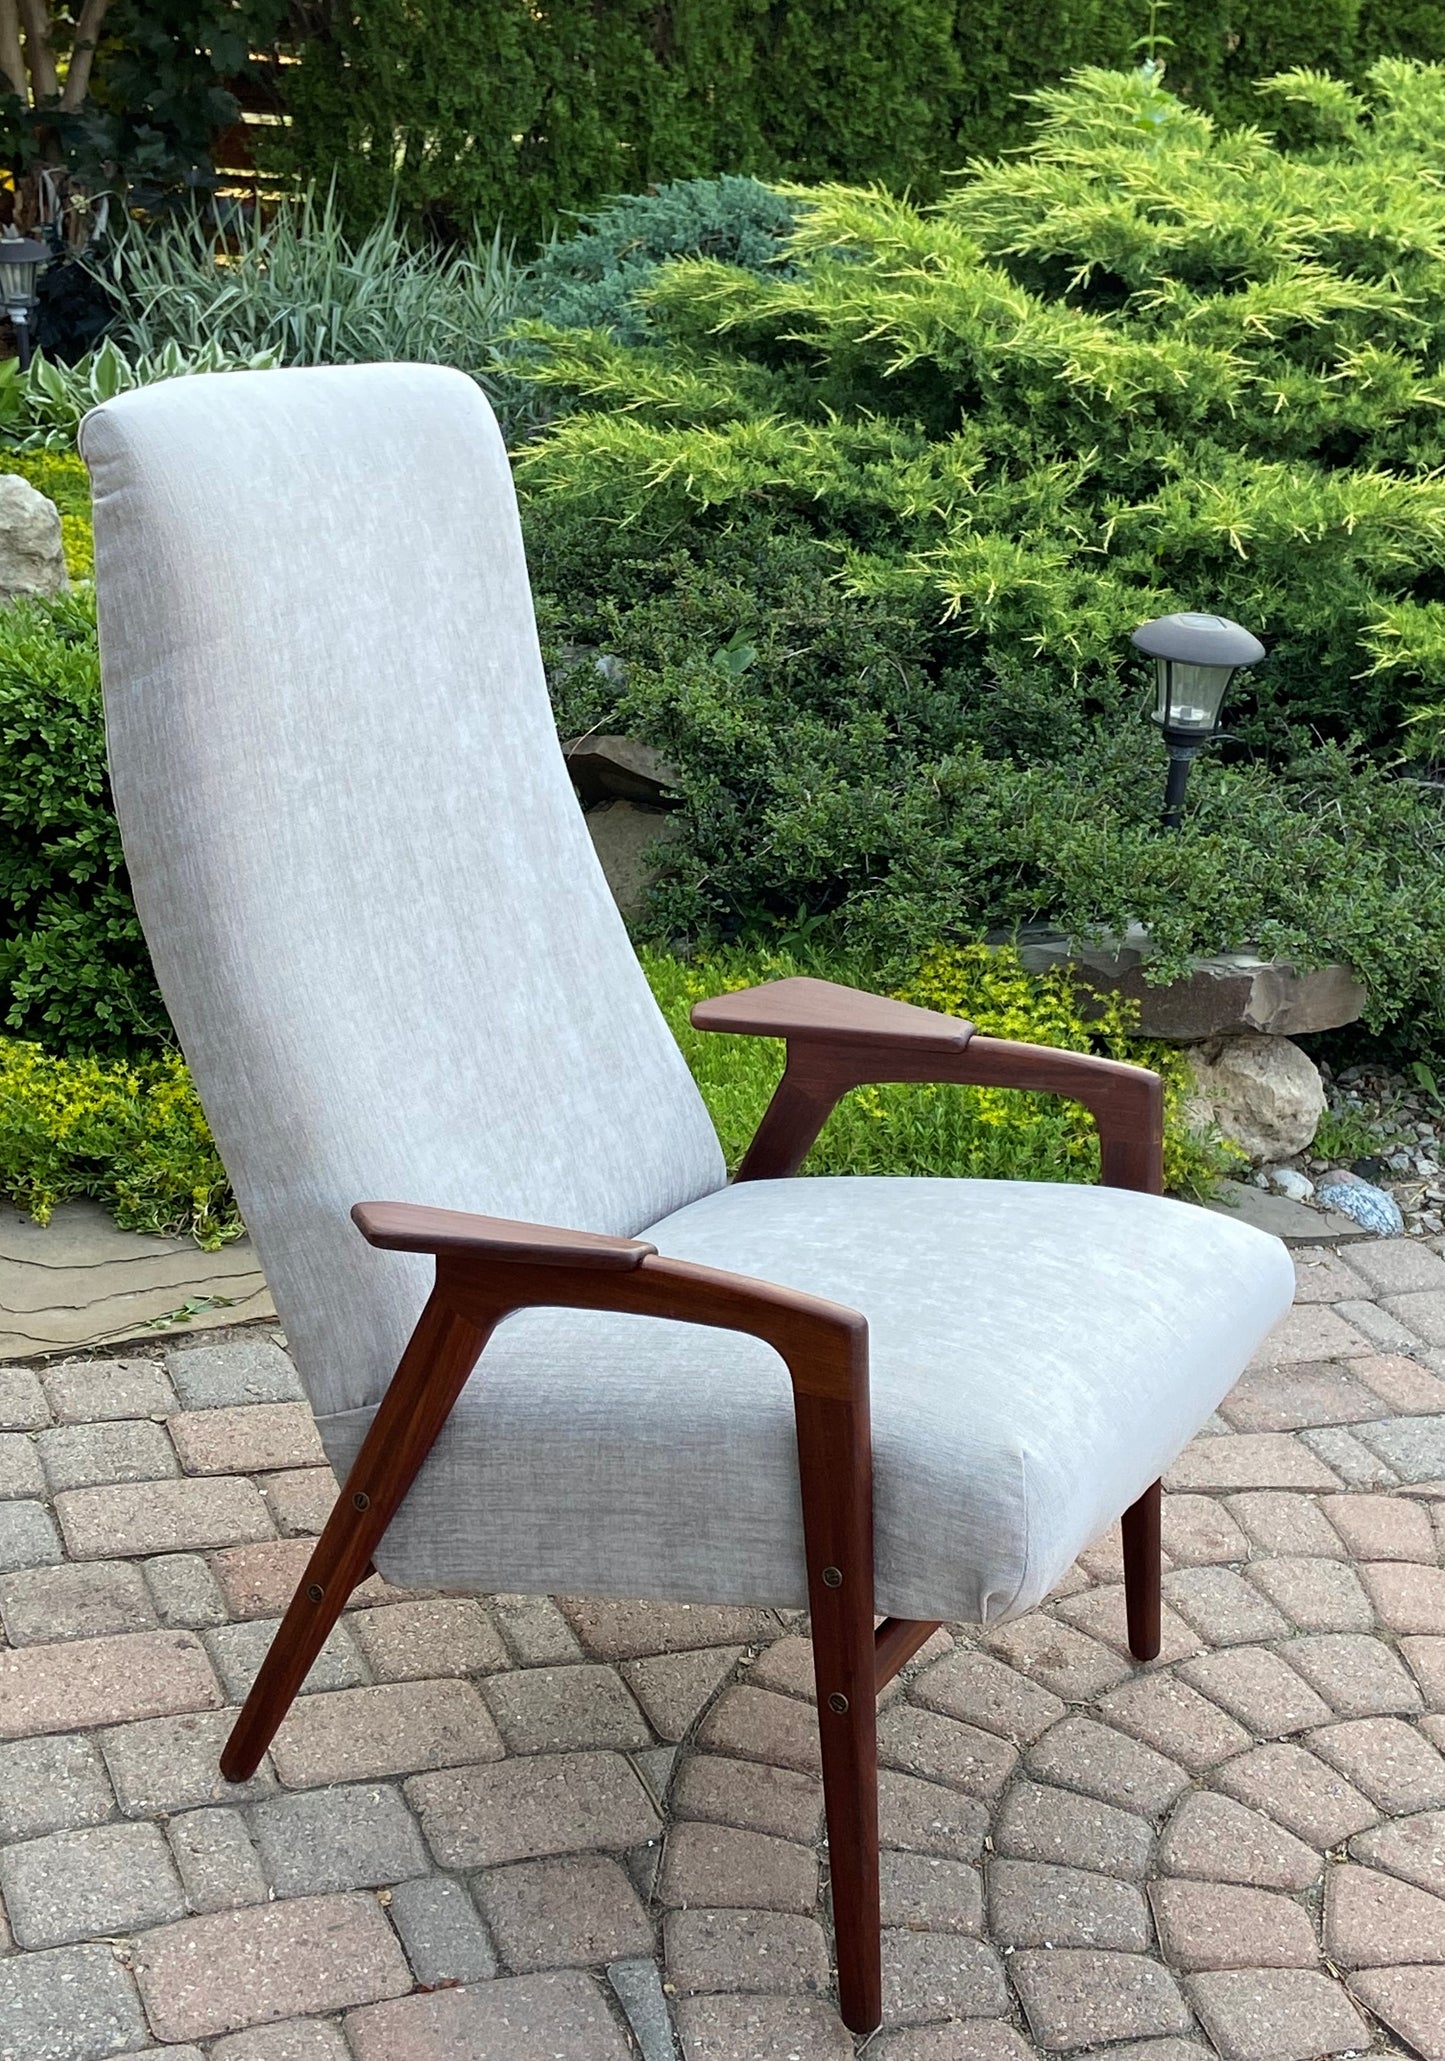 REFINISHED Danish Mid Century Modern Teak Lounge Chair NEW Upholstery, Perfect